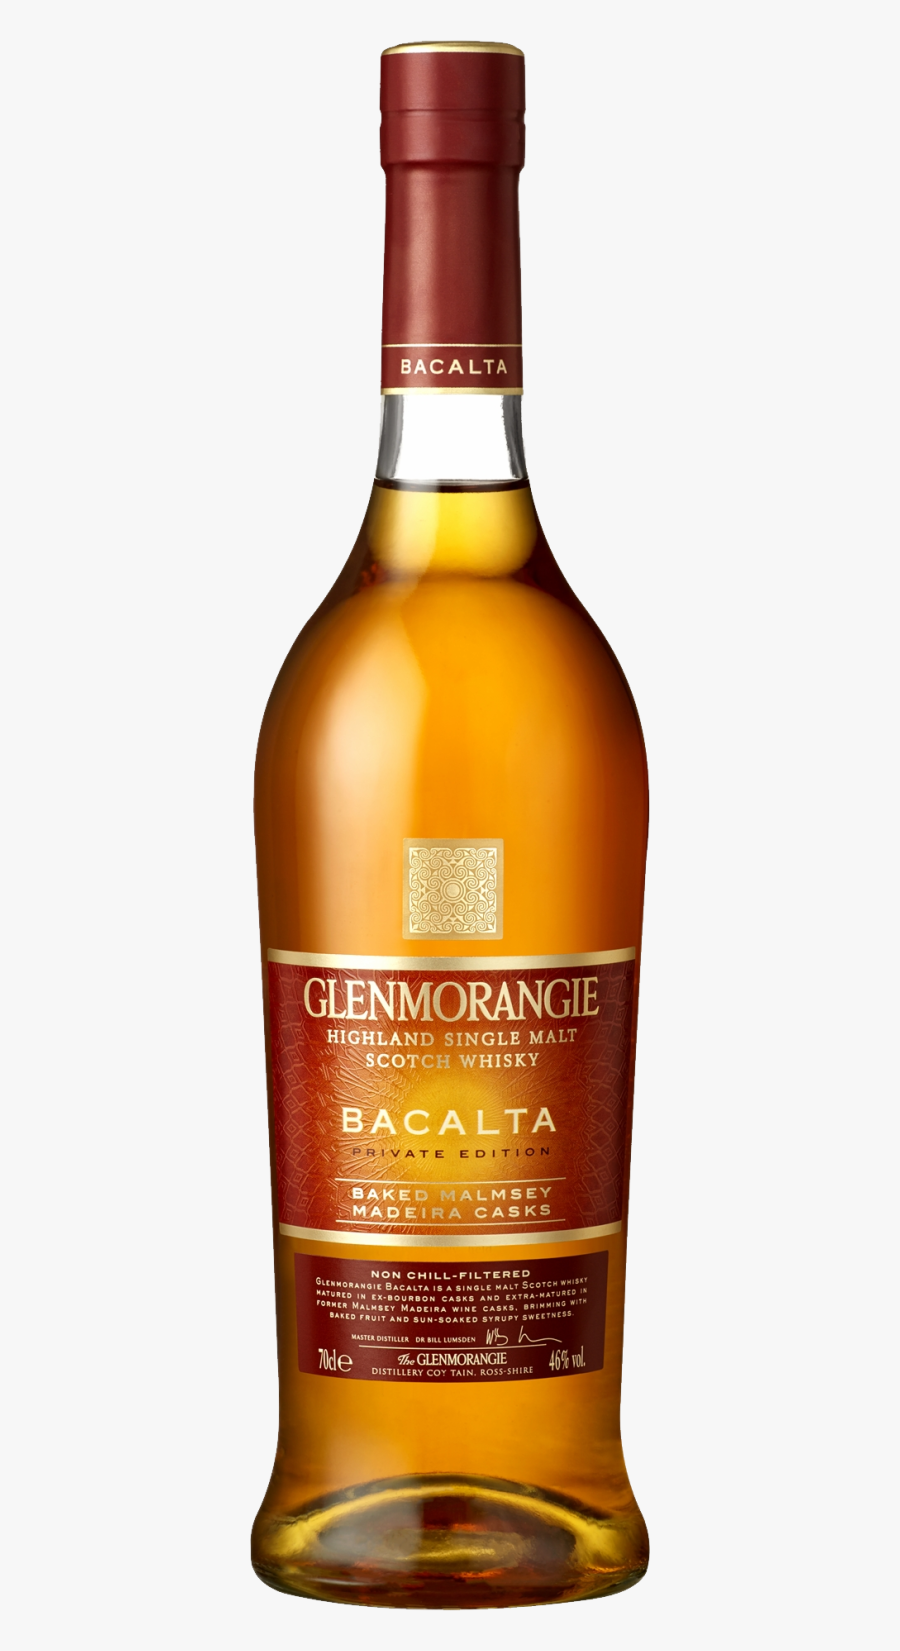 Whisky, Whiskey Png, Download Png Image With Transparent - Glenmorangie Bacalta, Transparent Clipart